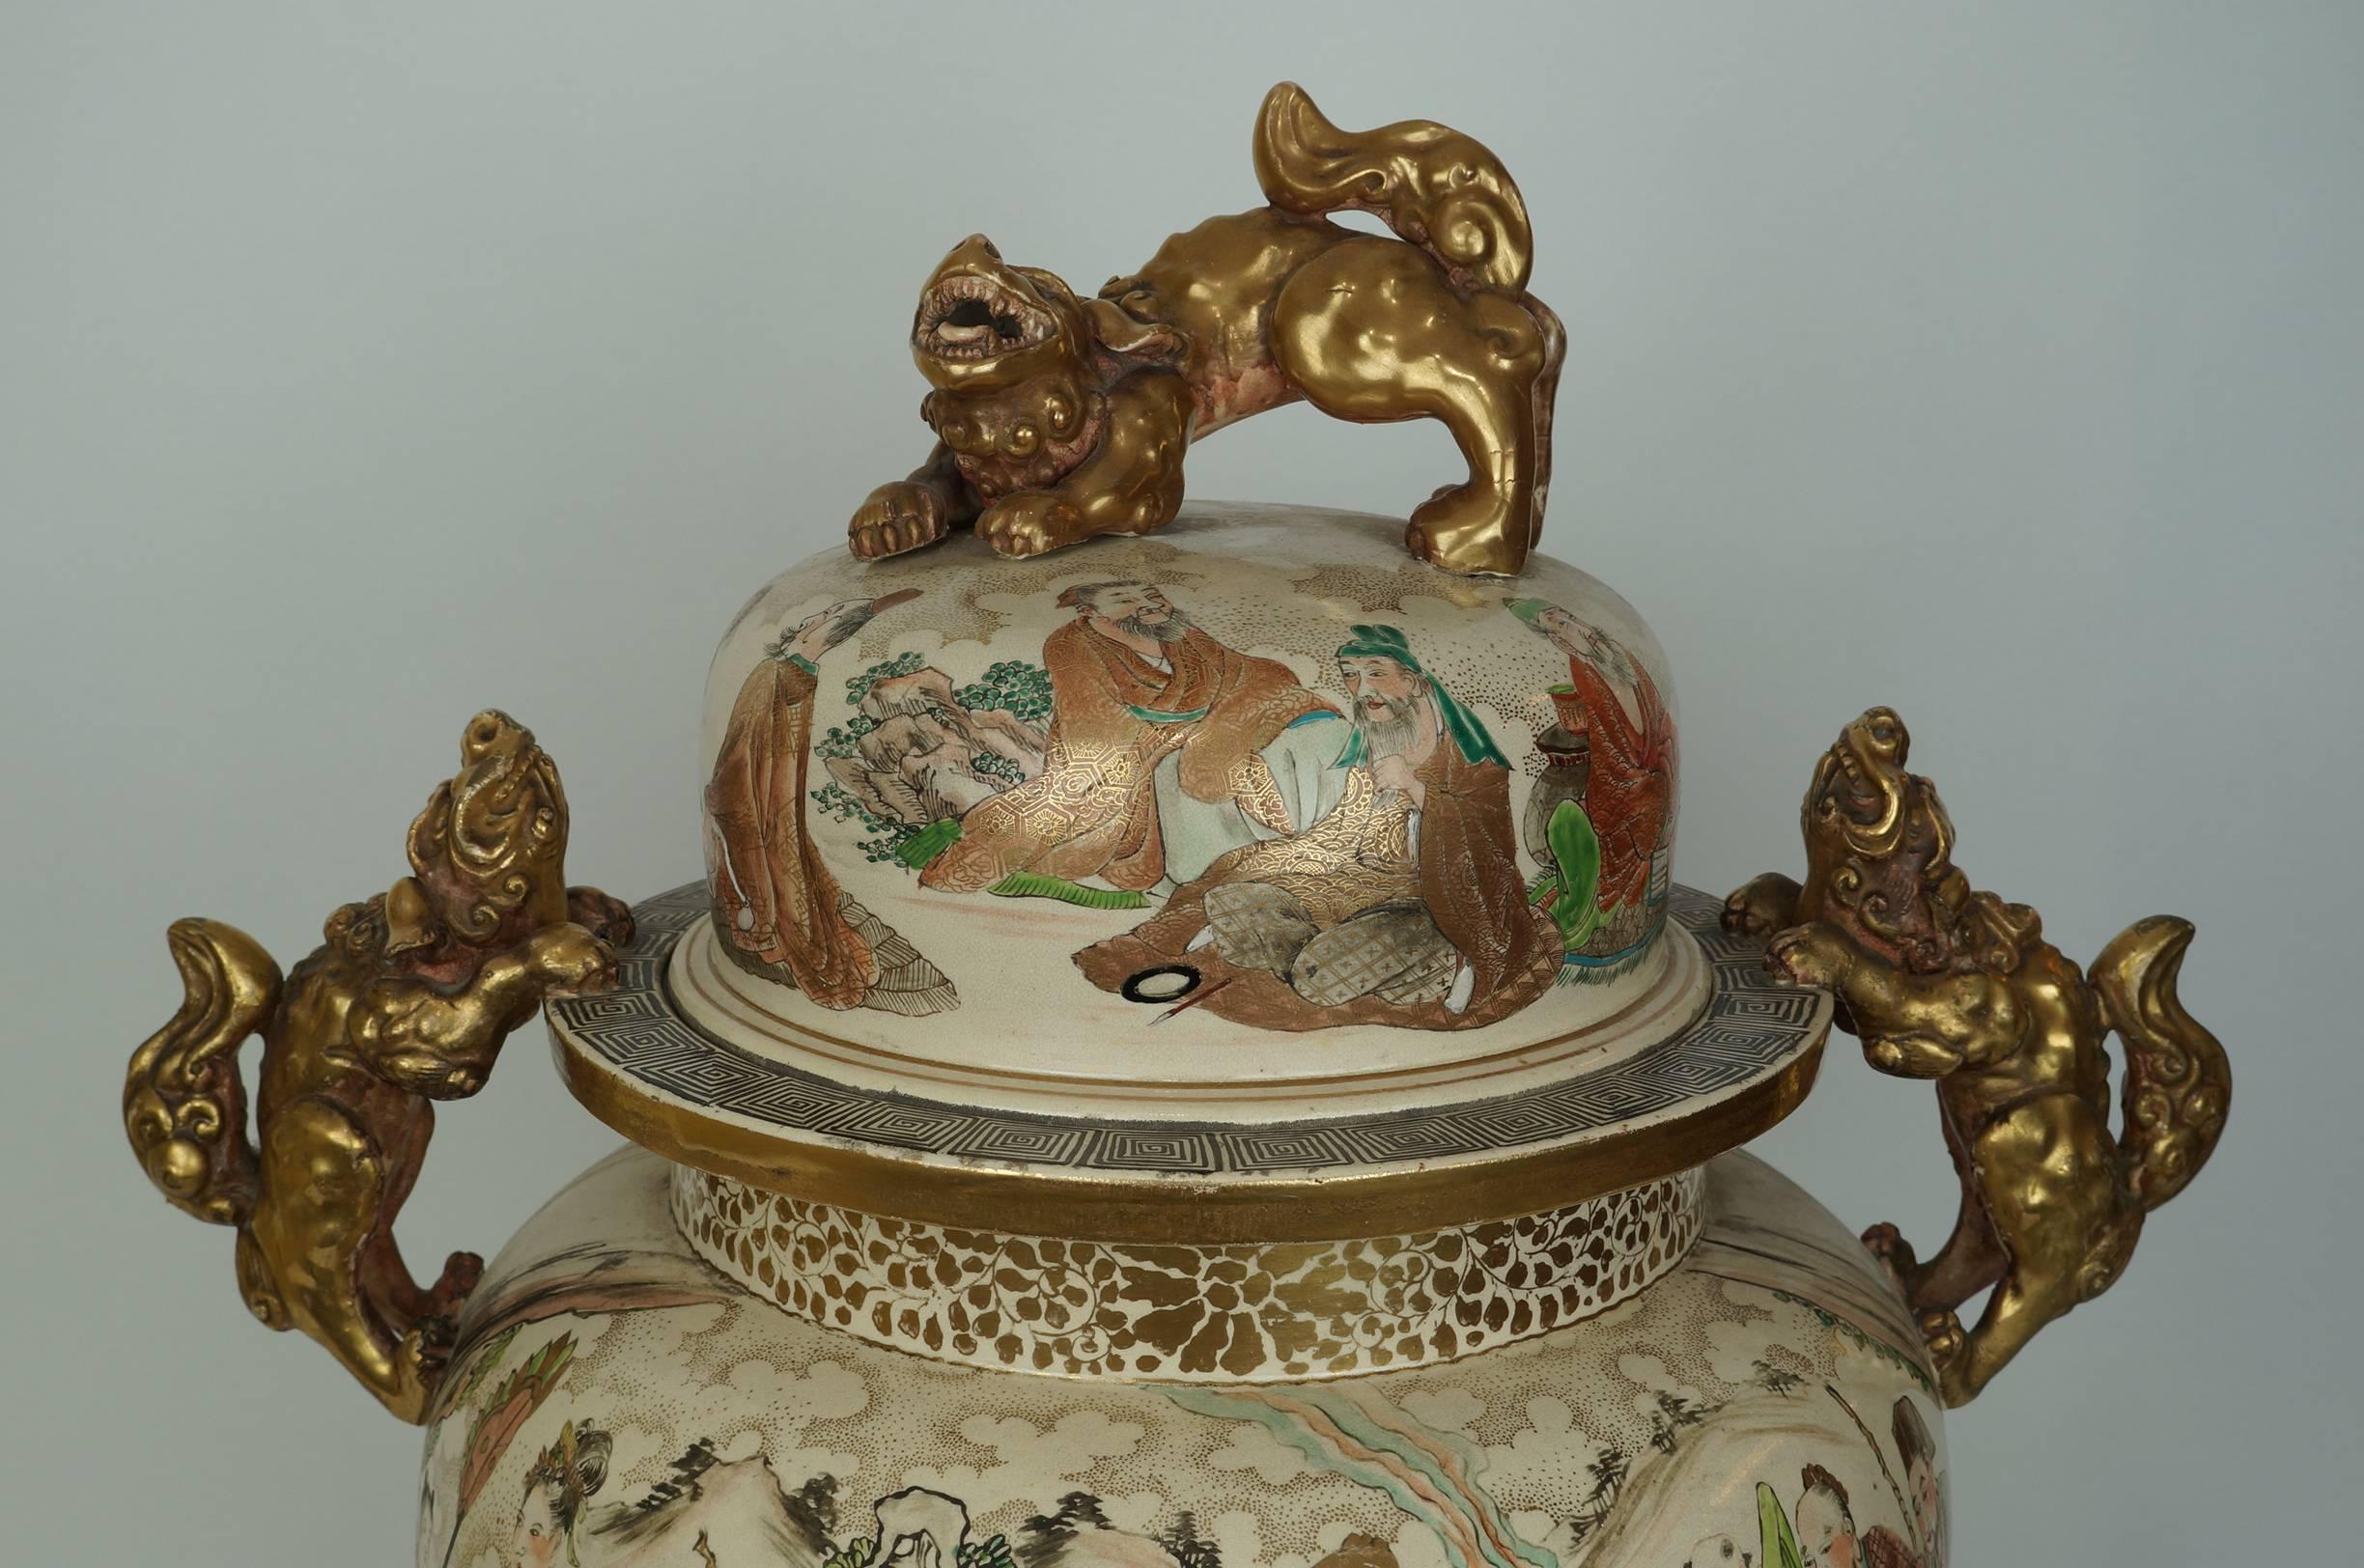 Large Antique Japanese Satsuma Koro Covered Urn with Foo Dog Handles and Cover 
Stock Number: DA195